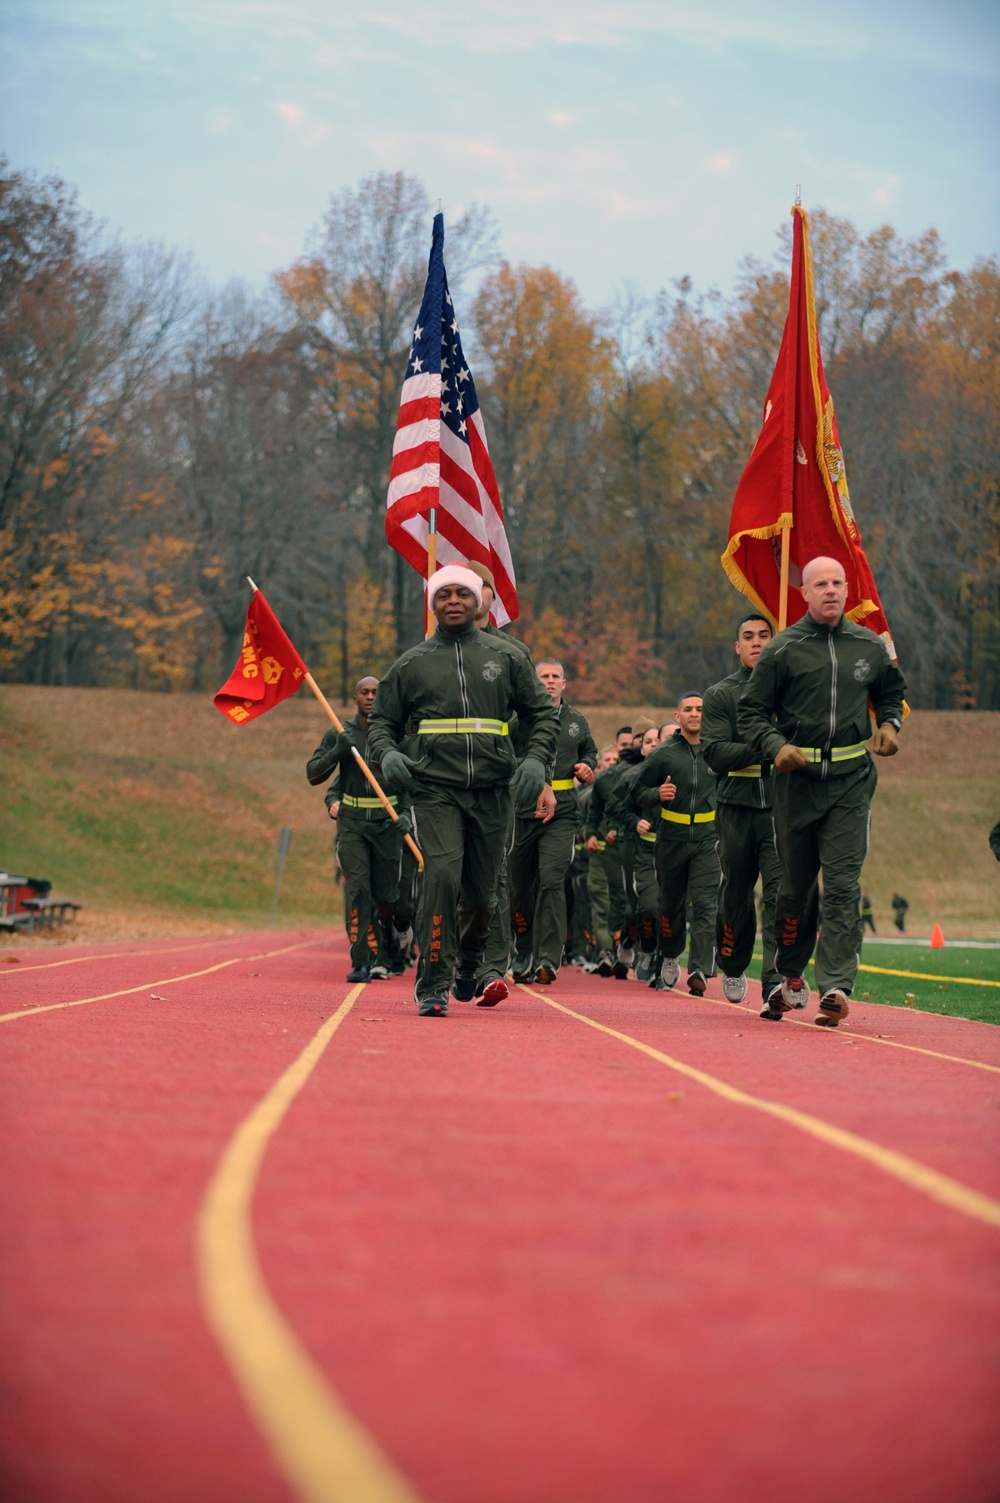 Toys for Tots Battalion run